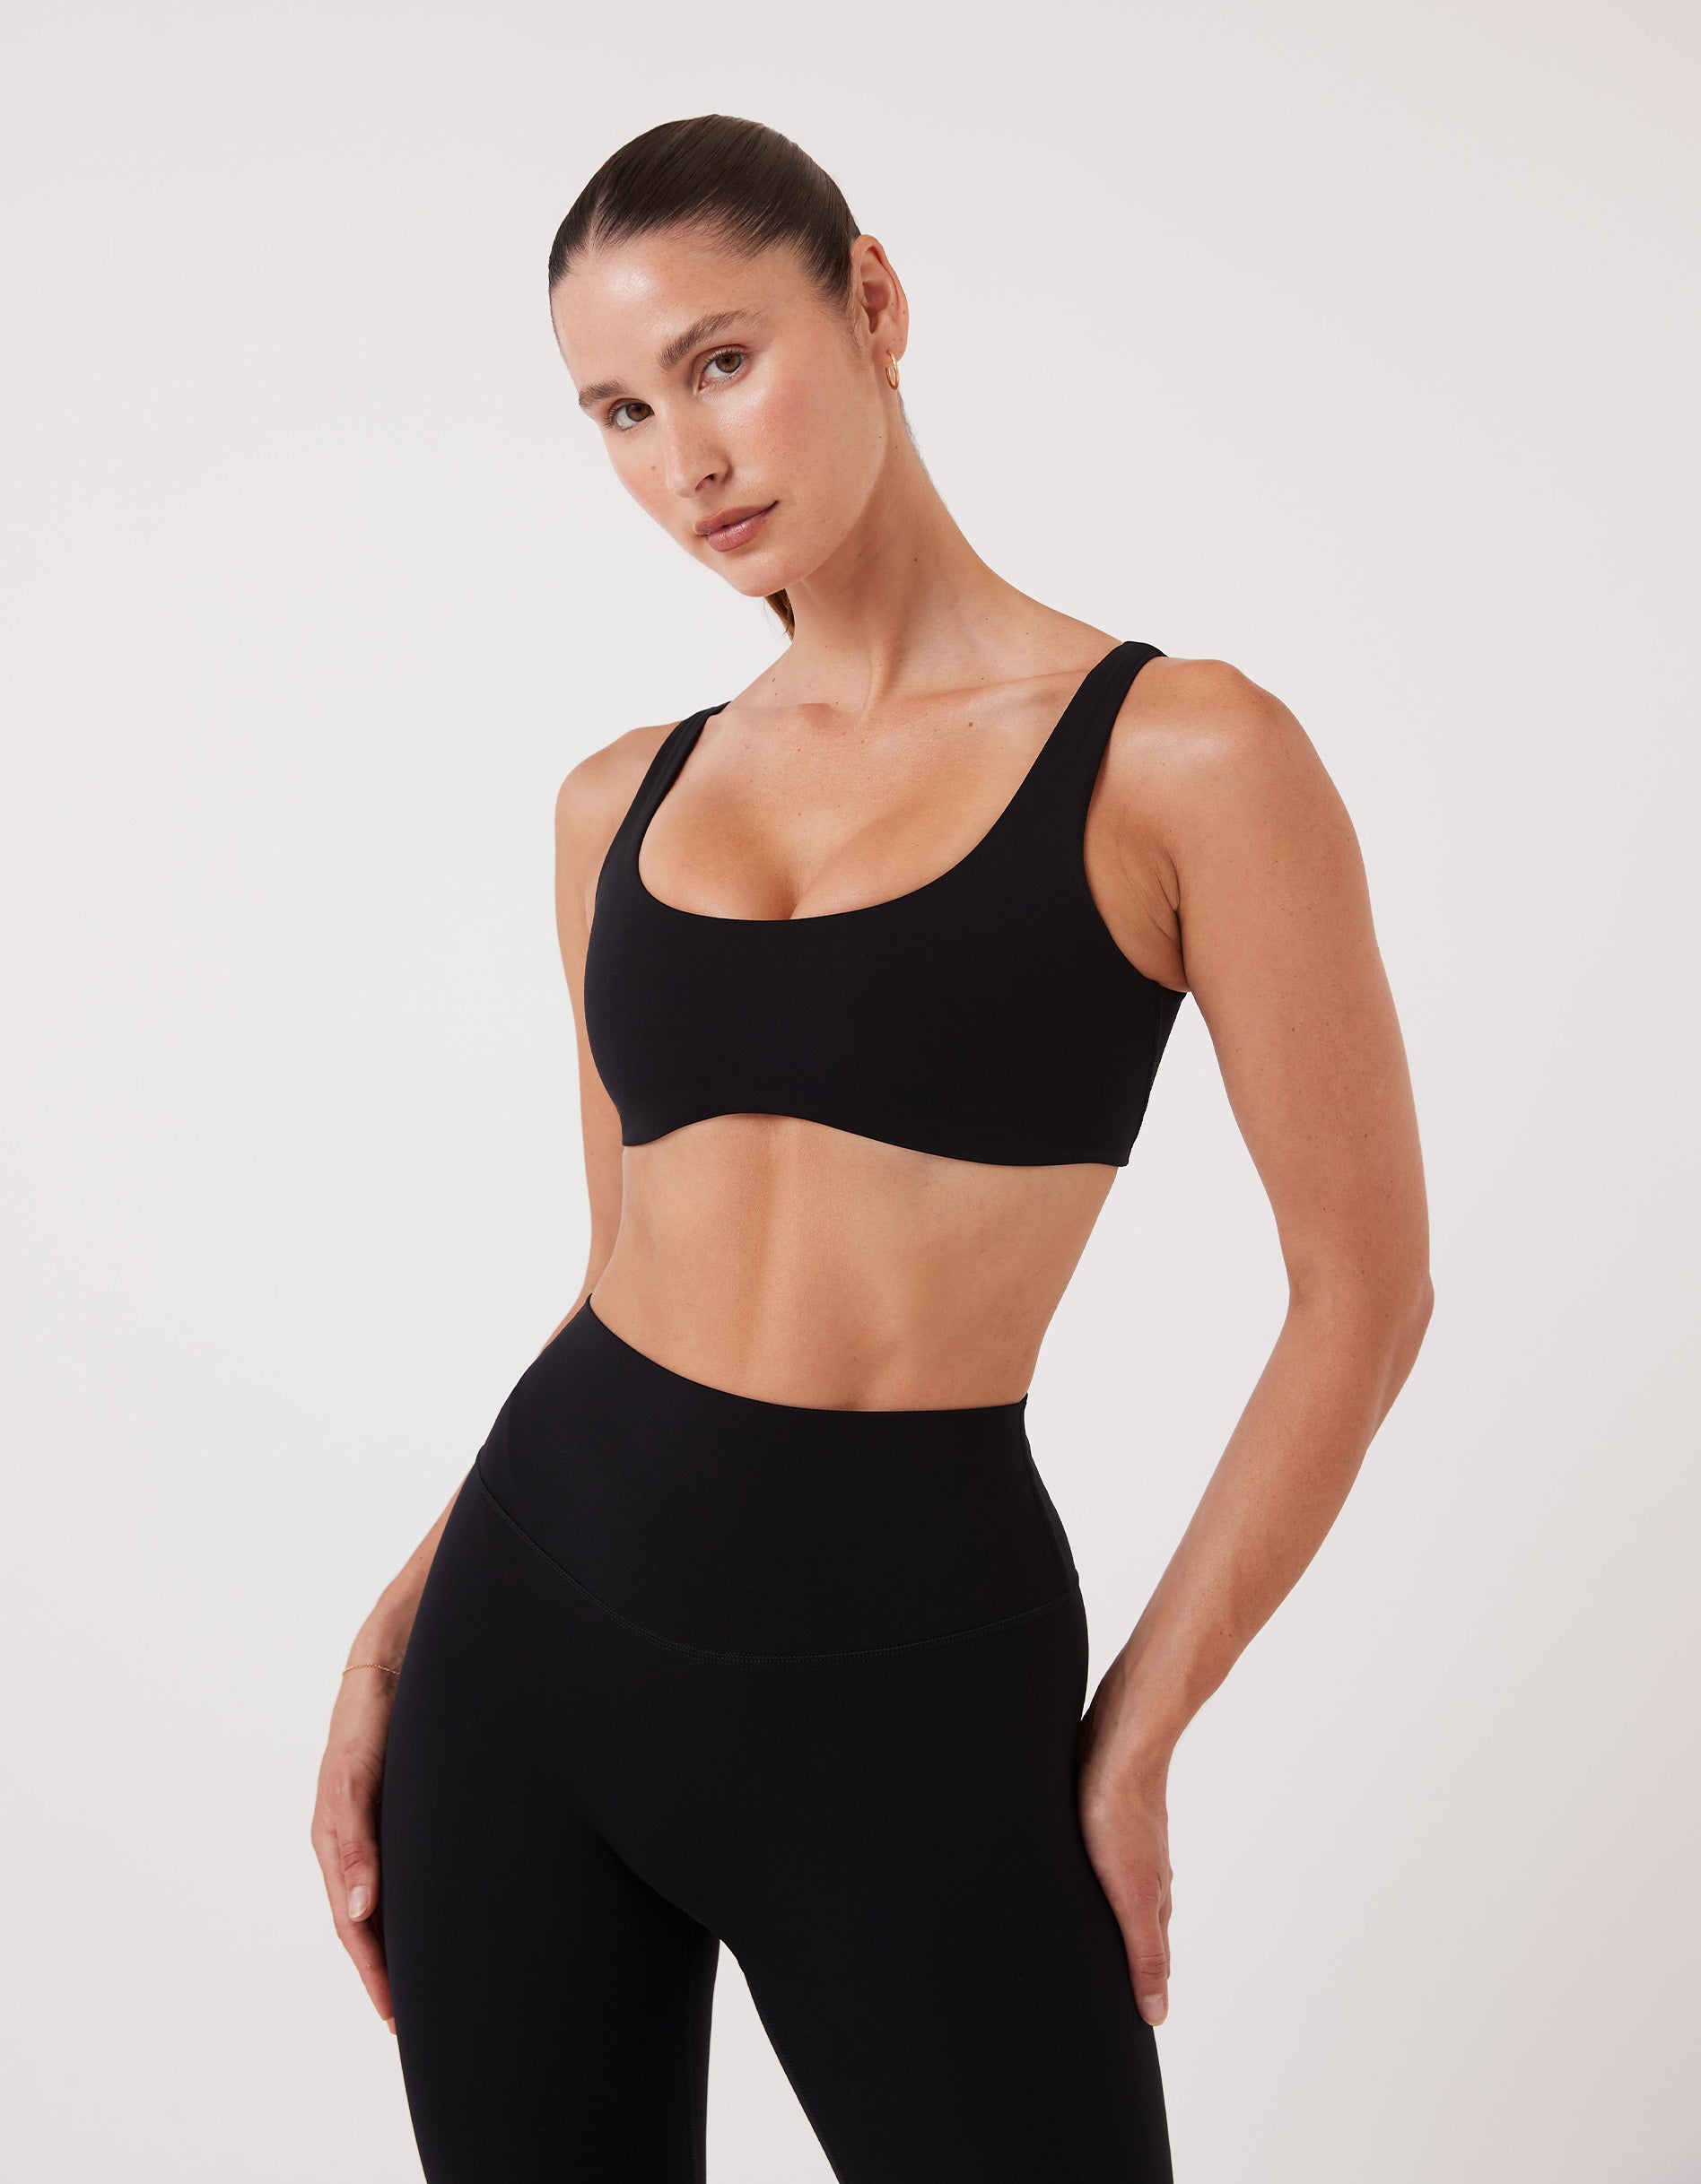 SportsPower Port Douglas - Running Bare is designed for all women. Whatever  shape or size you are, Running Bare makes sure you are fiercely  fashionable, feminine and above all, functional. #runningbare  #yourlocalexperts #